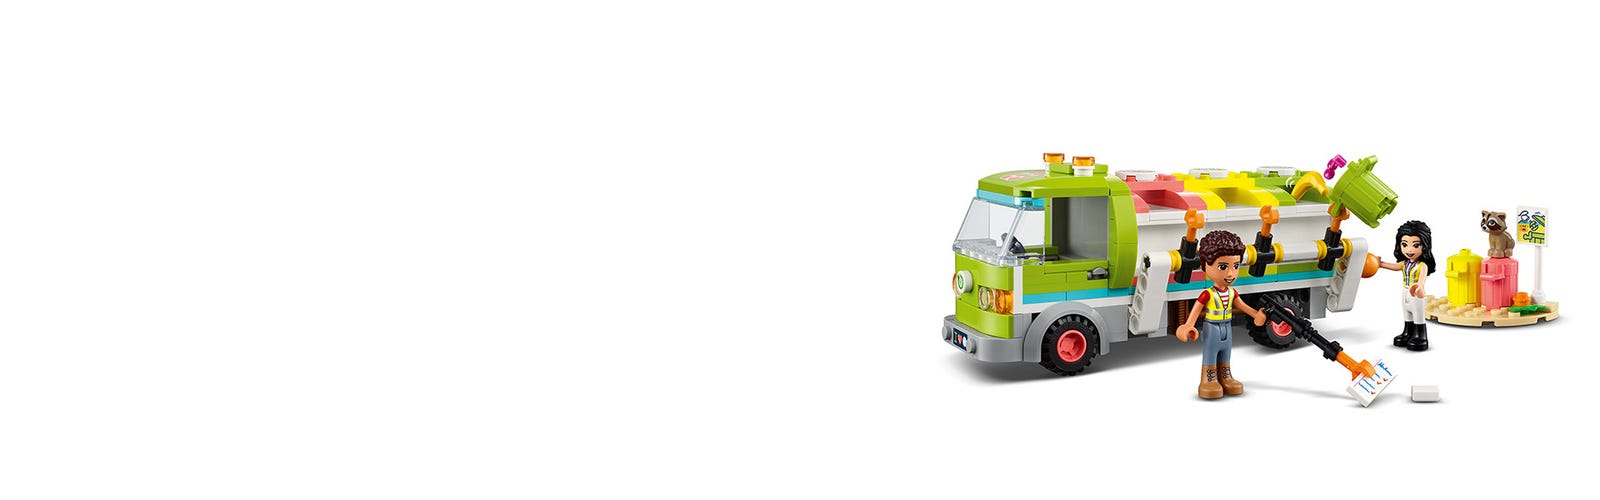 Recycling Truck 41712 | US | online LEGO® Official Friends Shop Buy at the